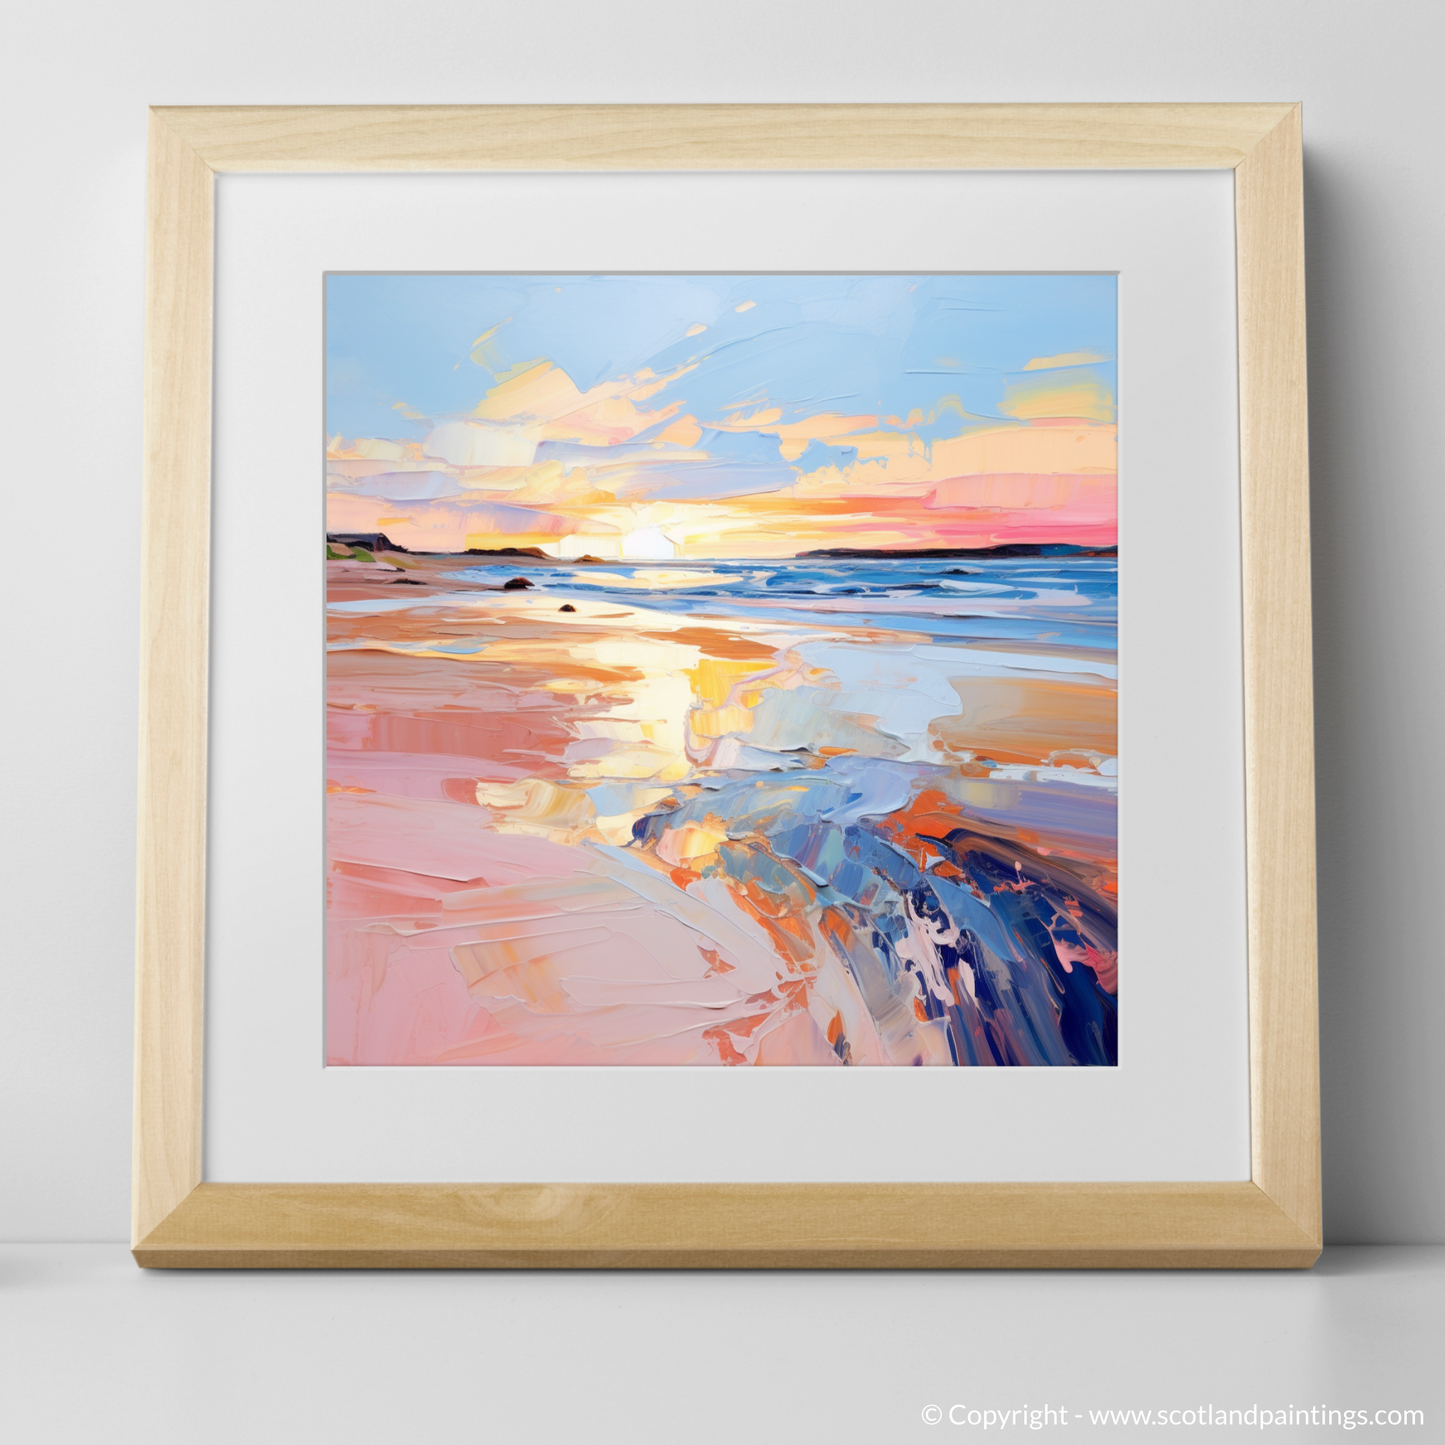 Art Print of Gullane Beach at sunset with a natural frame